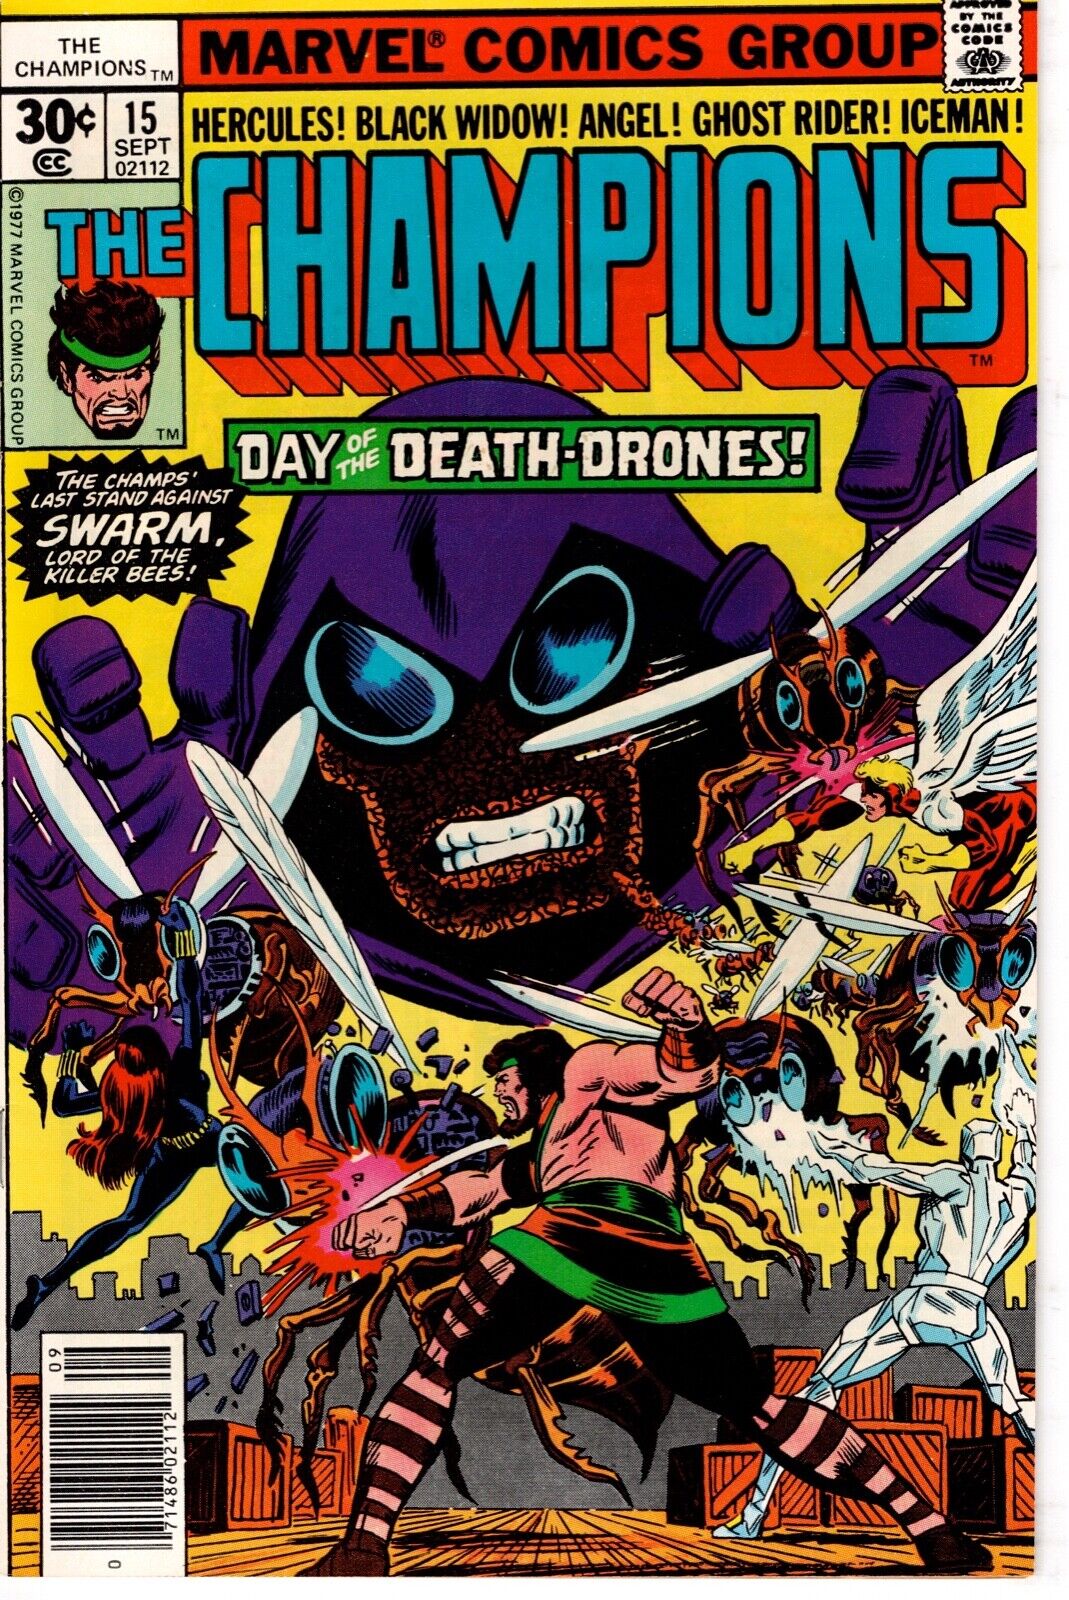 Champions (Vol 1) #15 Sept 1977 Day of the Death-Drones